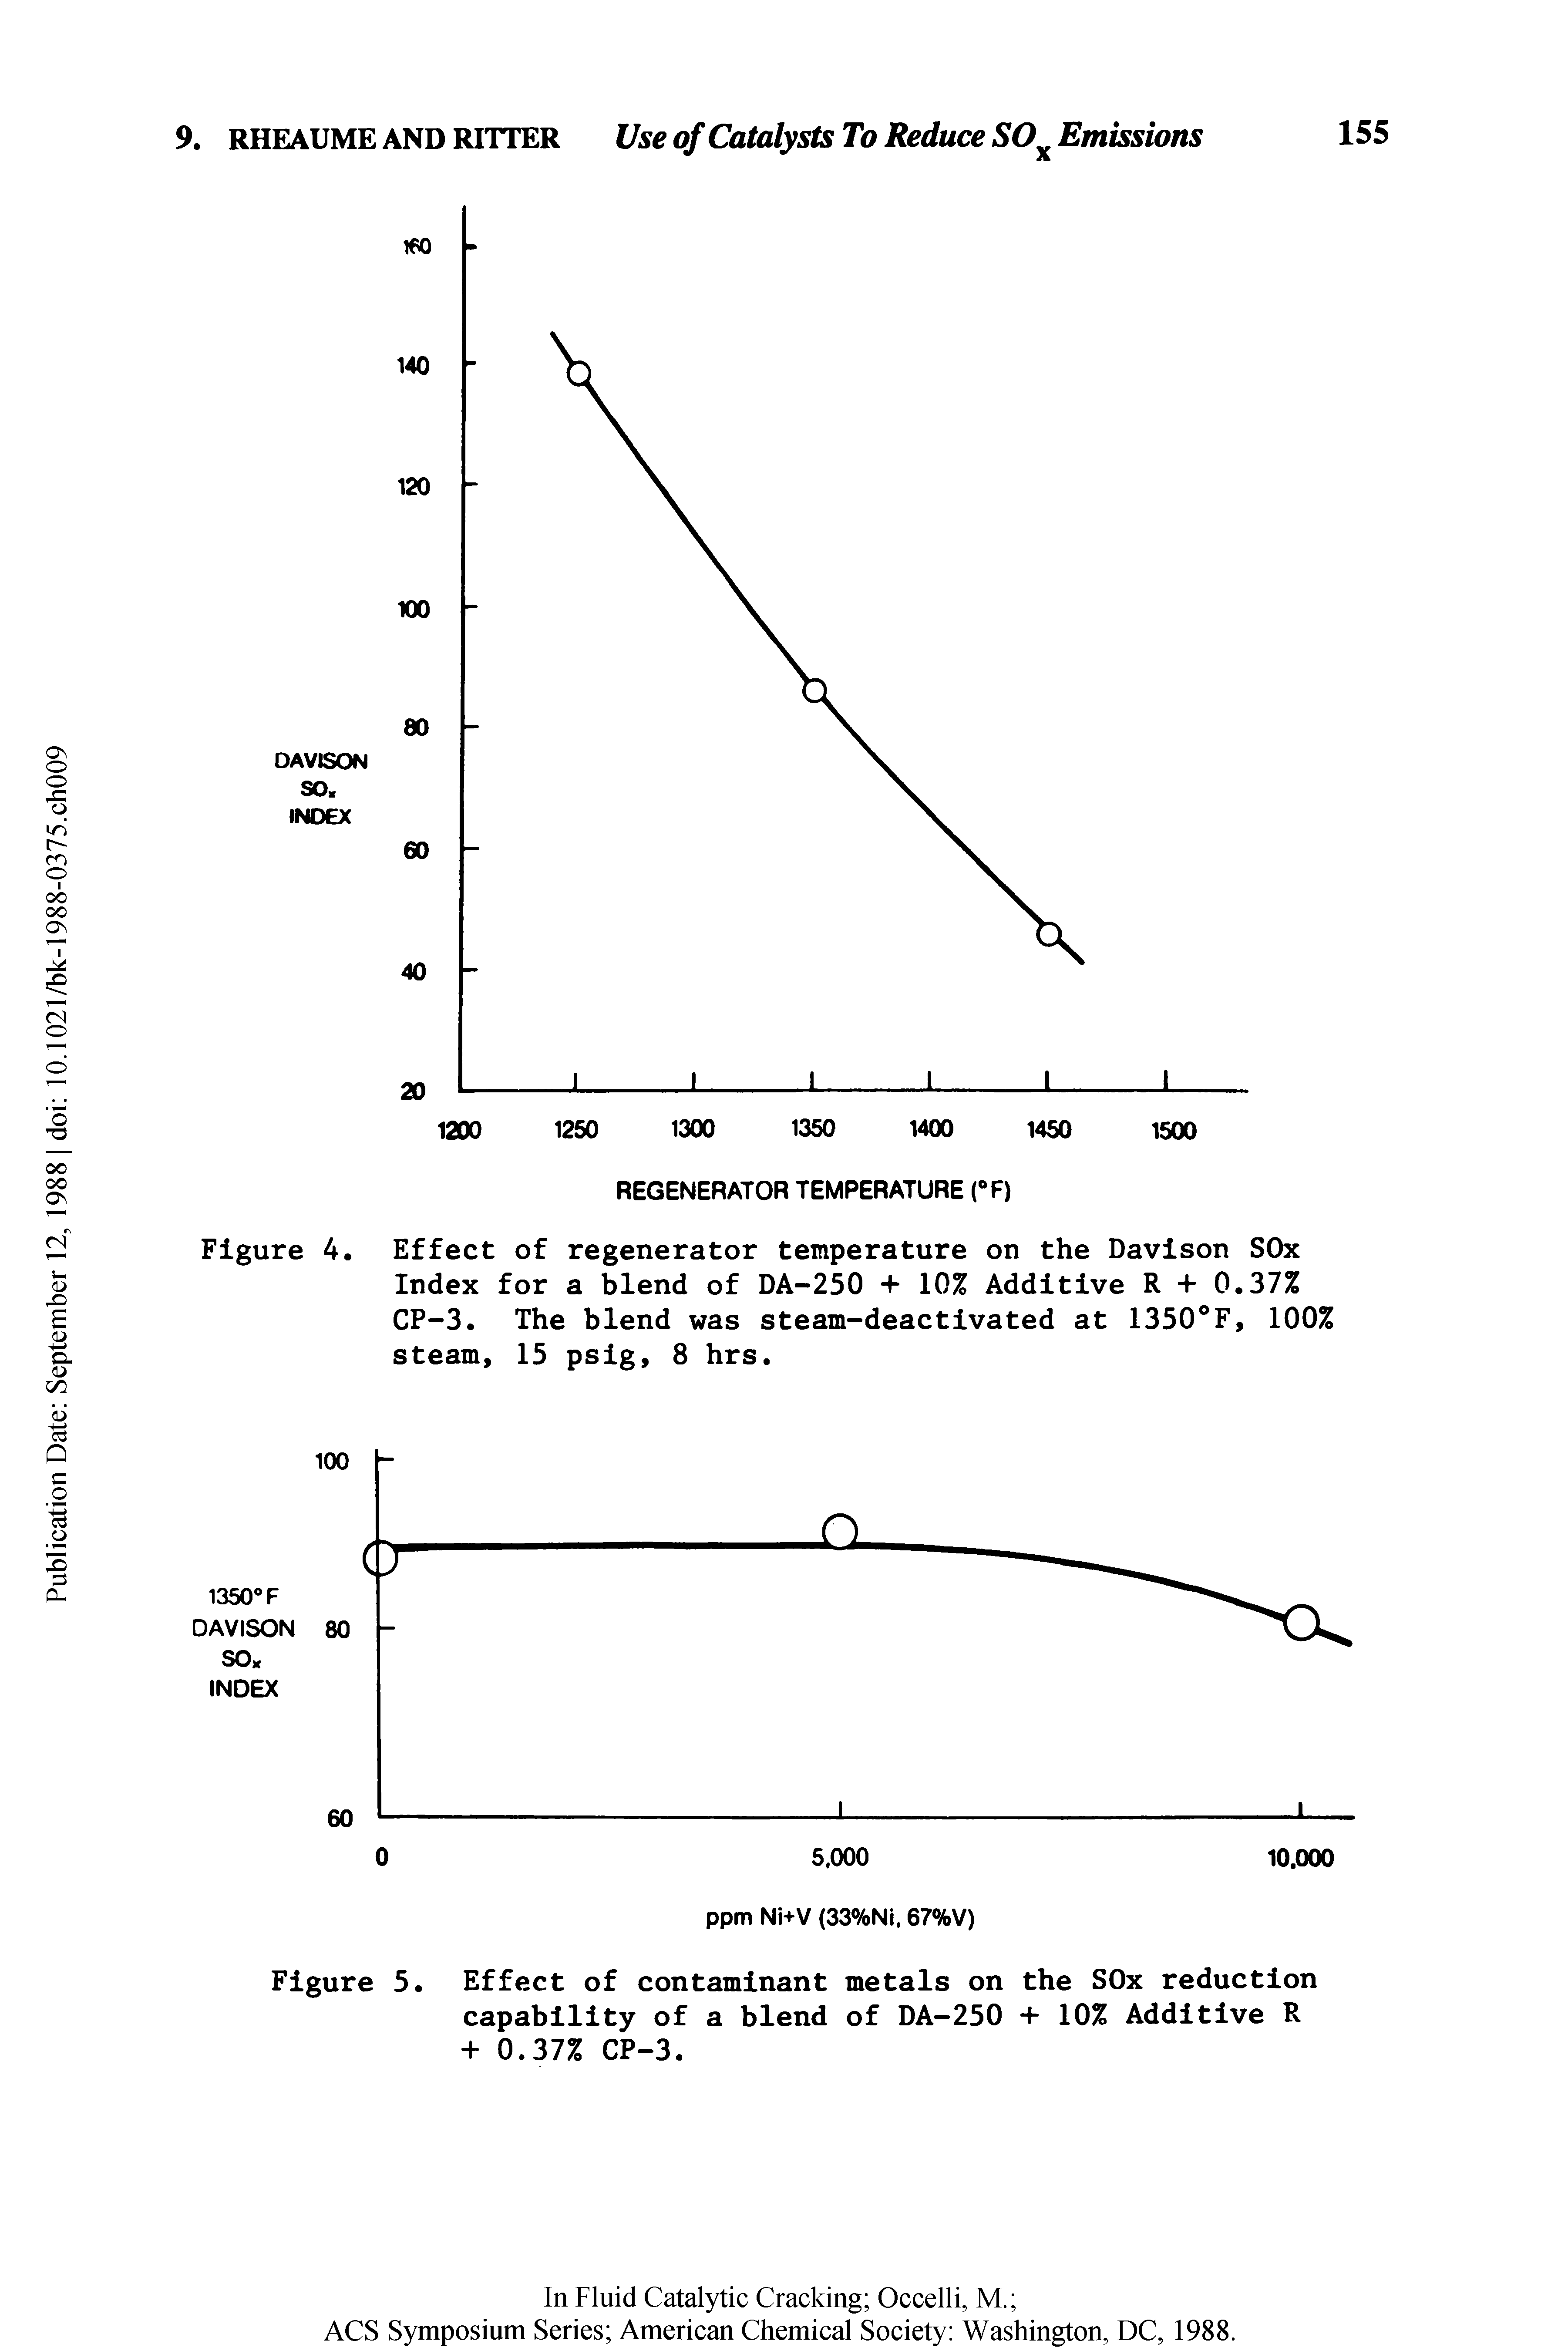 Figure 5. Effect of contaminant metals on the SOx reduction capability of a blend of DA-250 + 10% Additive R + 0.37% CP-3.